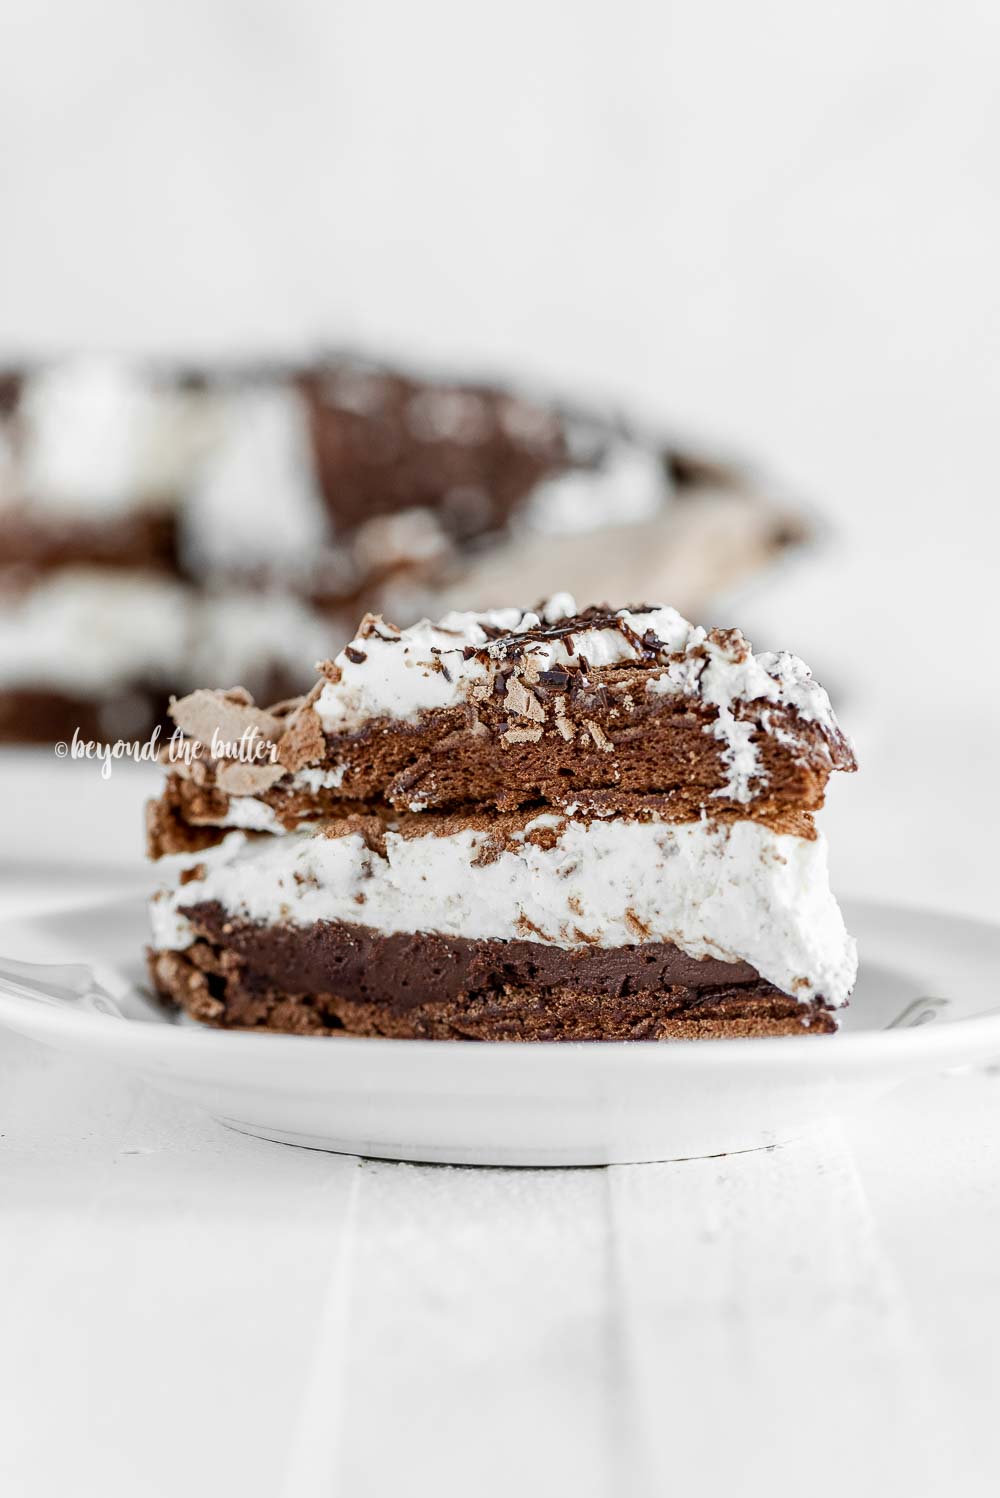 Chocolate Meringue Layer Cake - Beyond the Butter